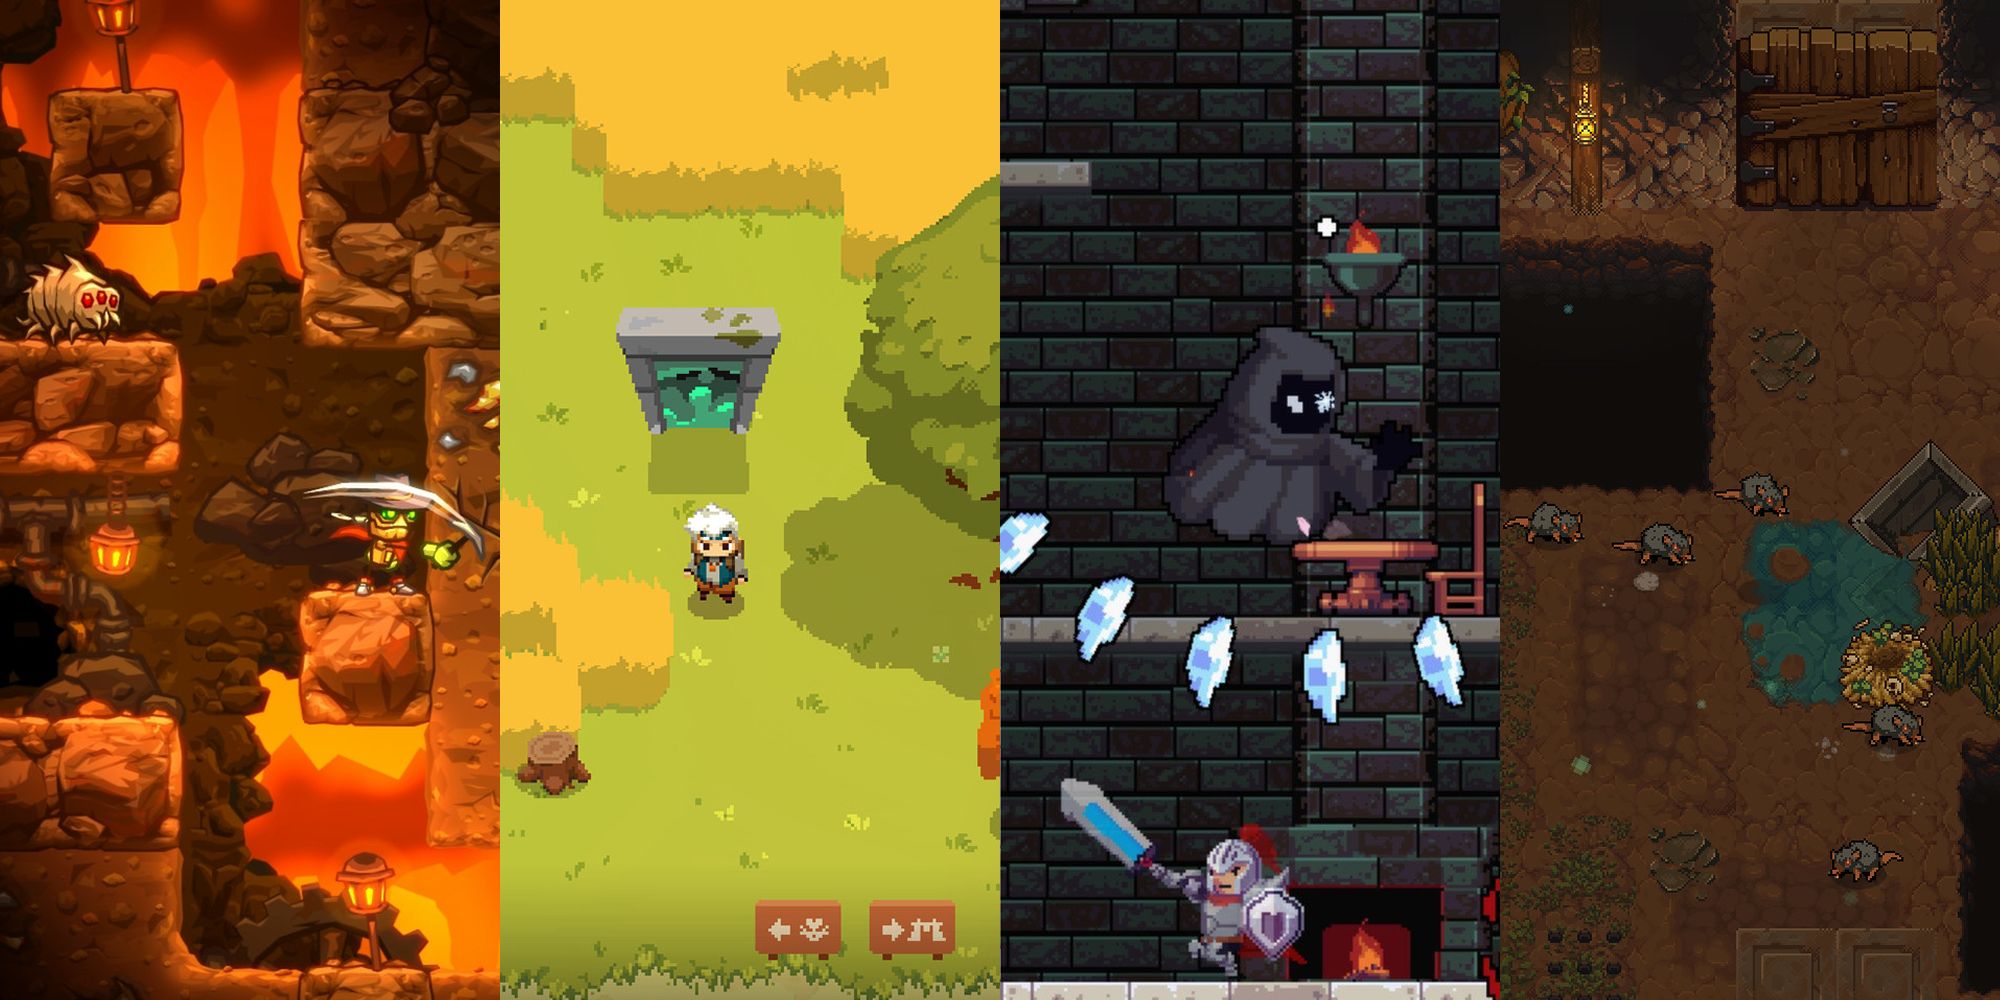 A Split Image Showing Scenes From Steamworld Dig, Rogue Legacy, Undermine, and Moonlighter